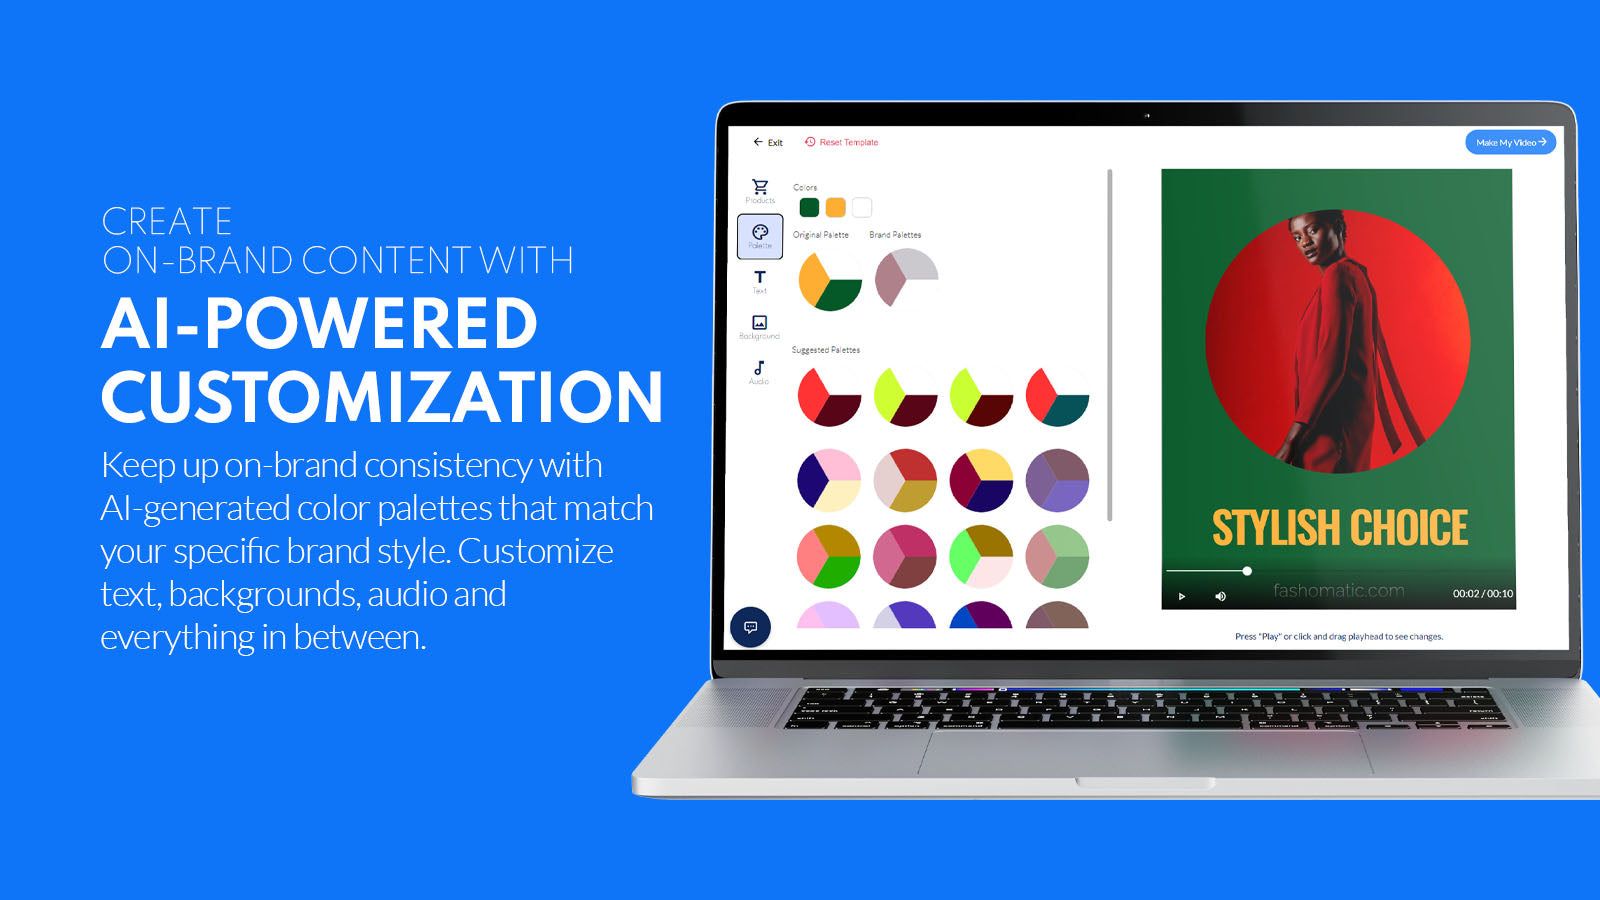 Create on-brand content with AI-powered customization options